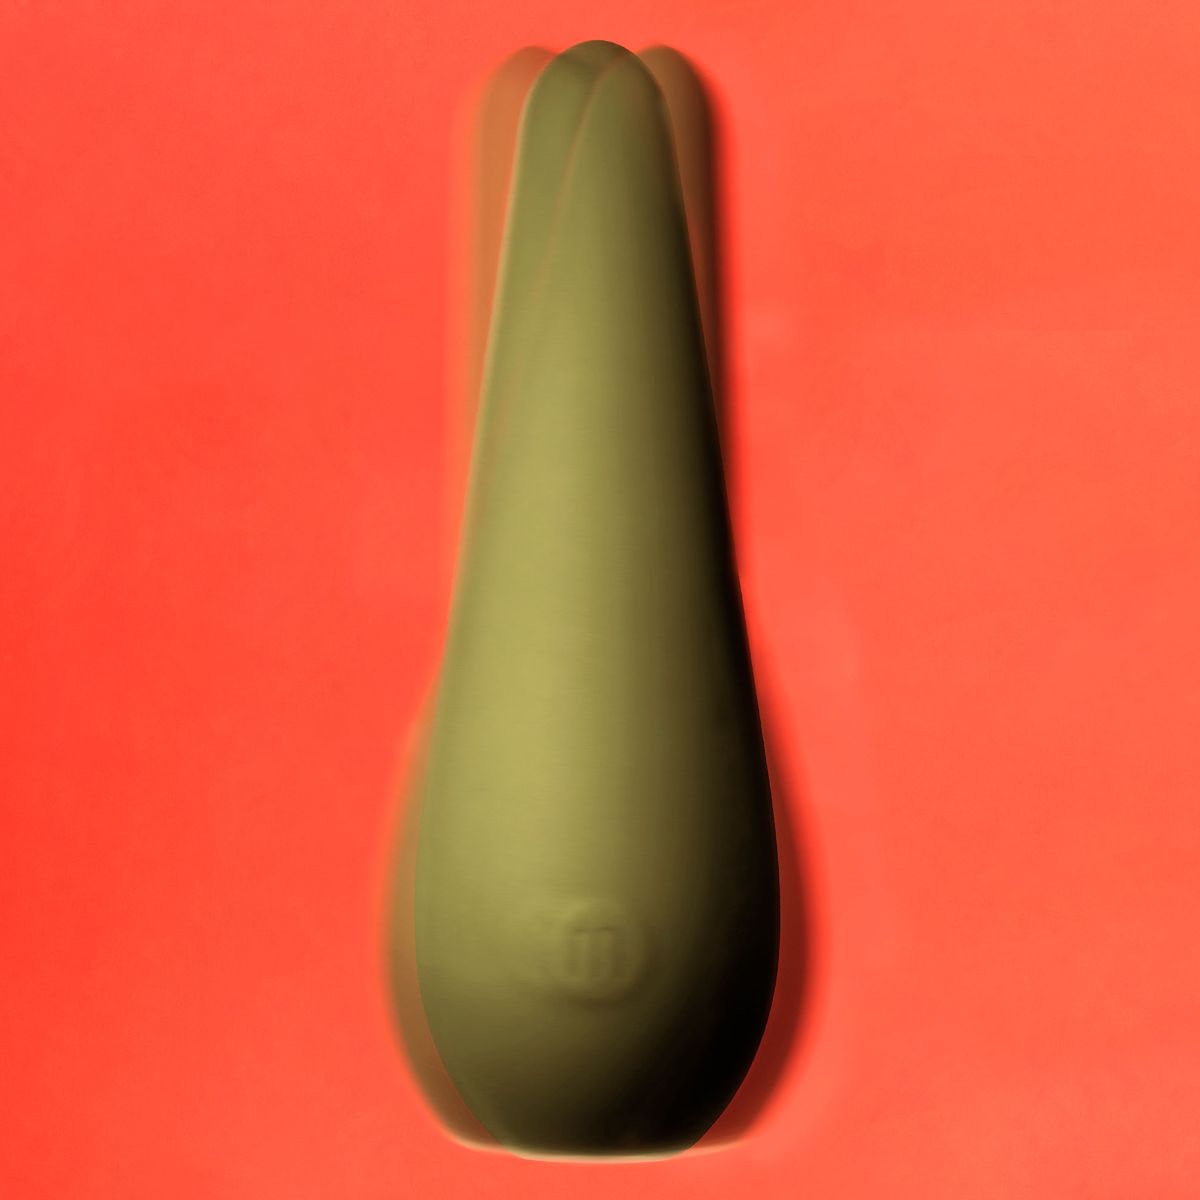 Japanese New Sil Pack First Time Sex Vedio - The Best Luxury Vibrators 2022 | The Strategist